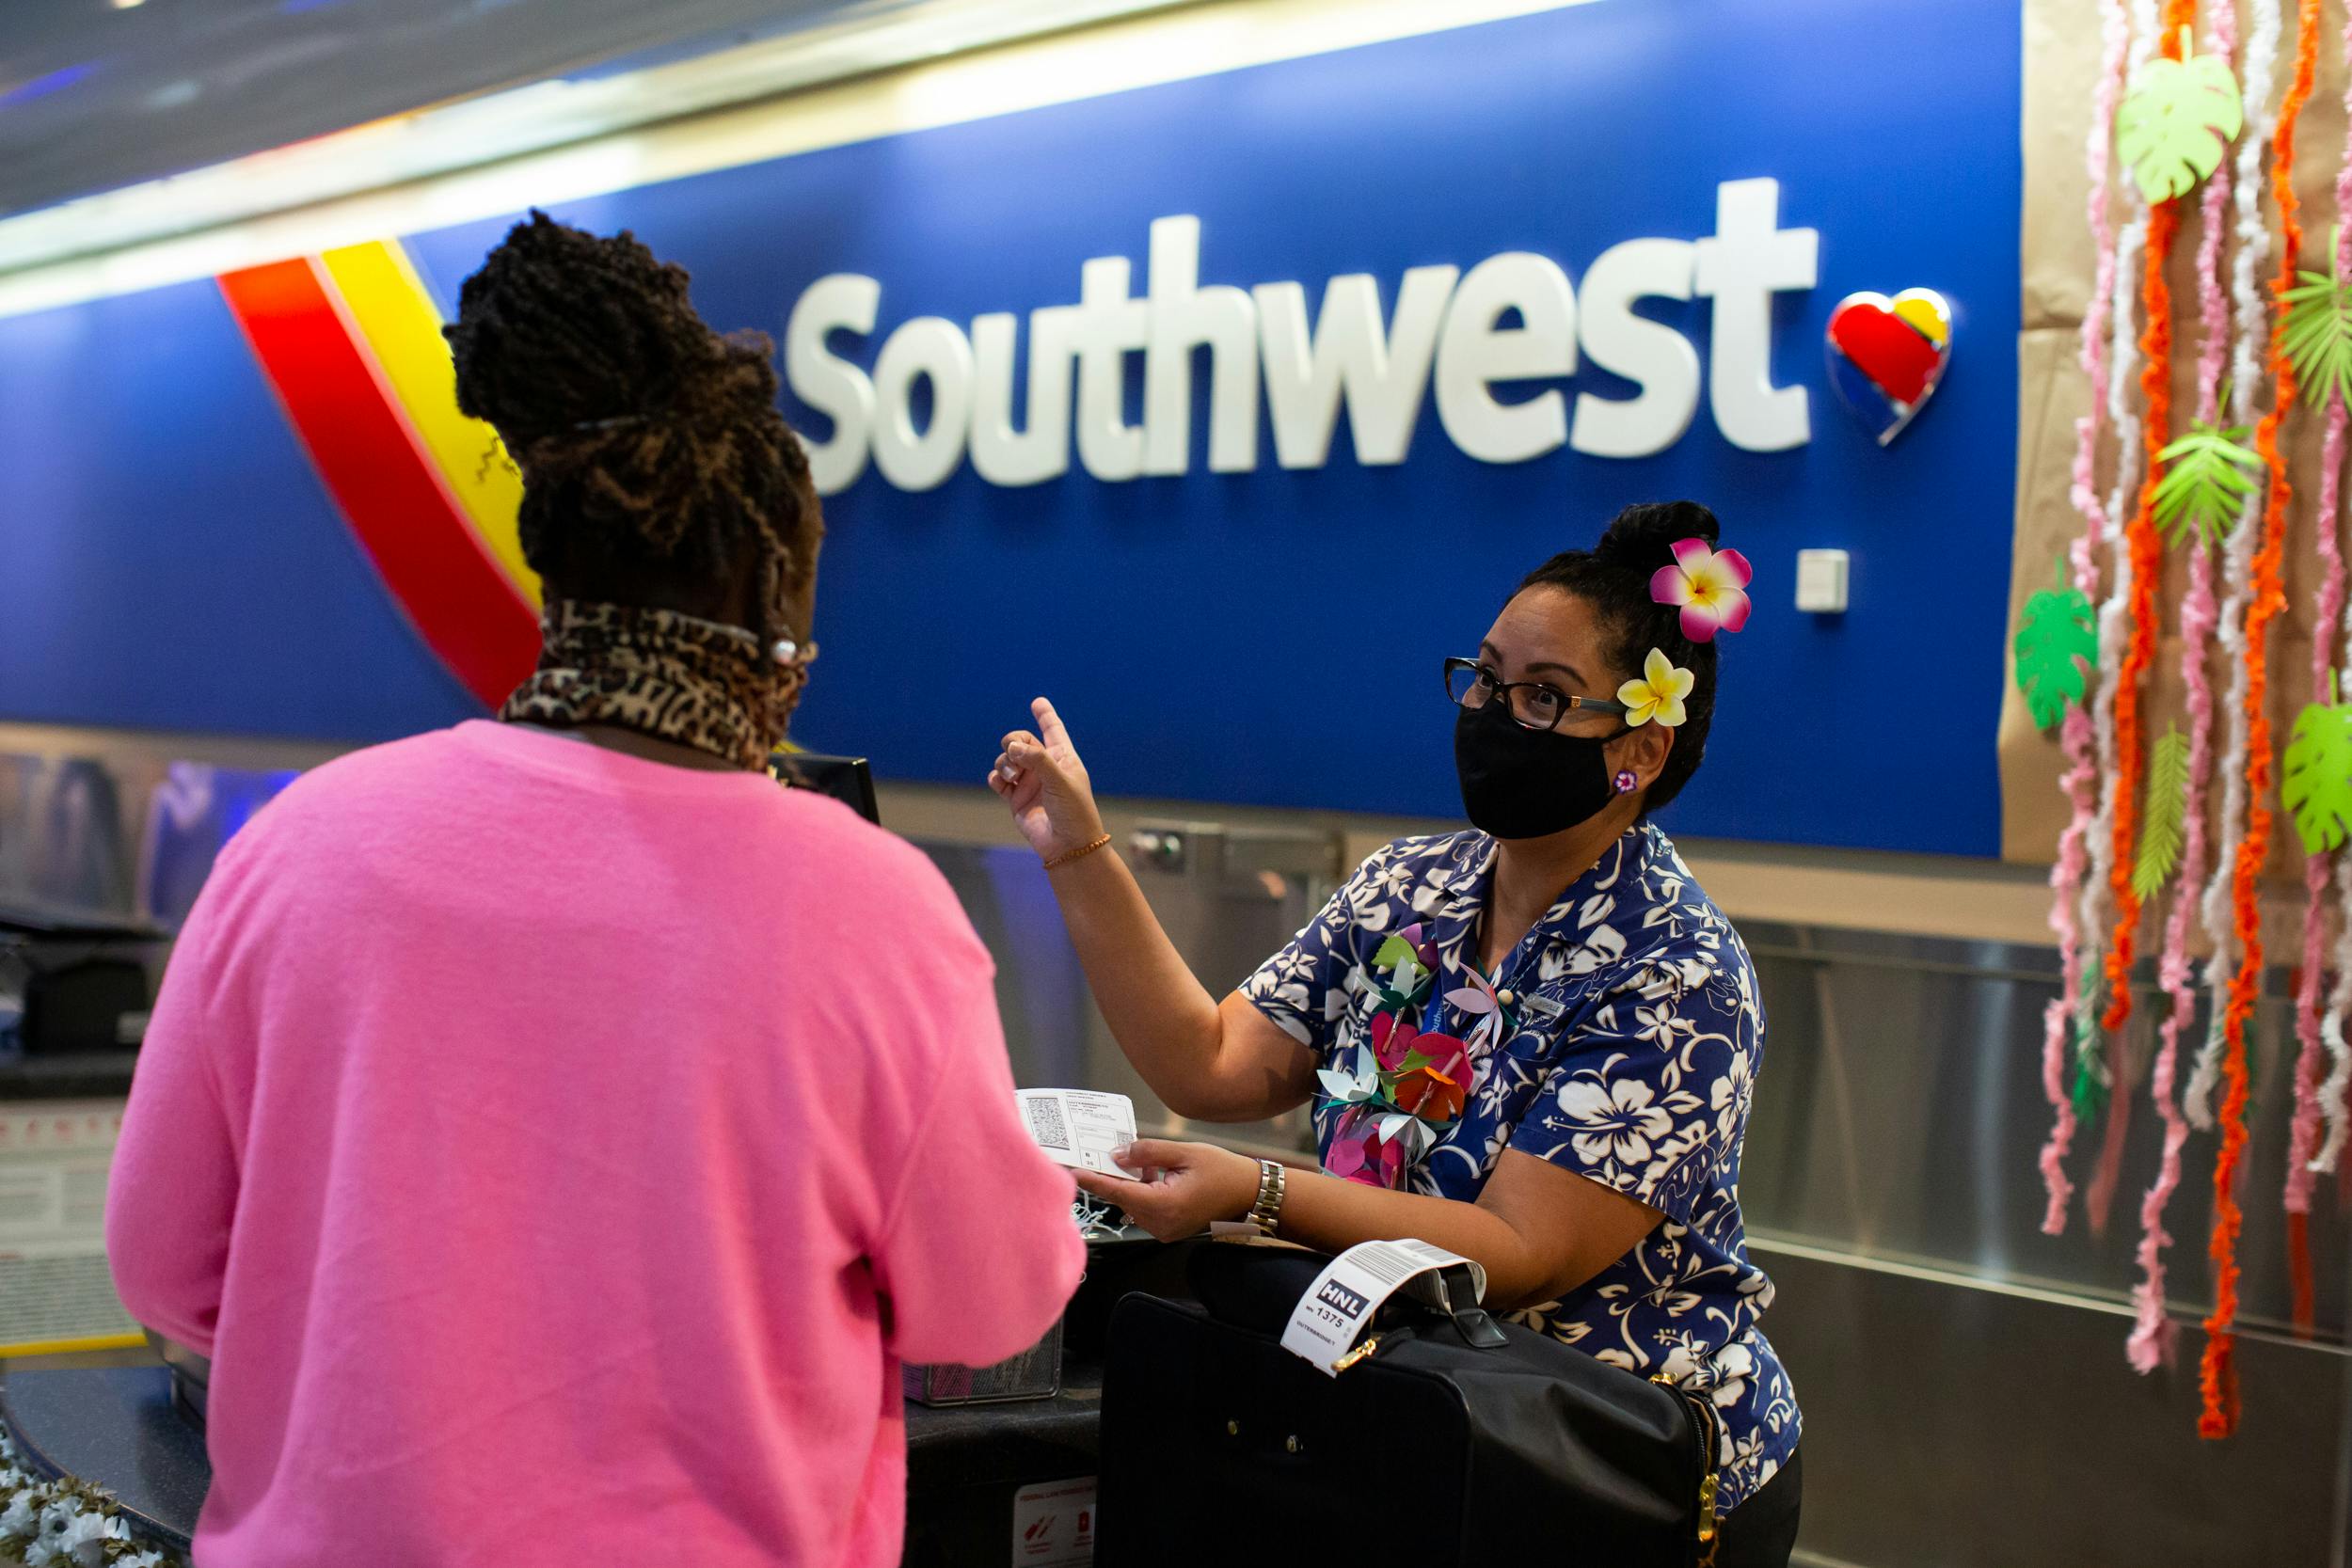 Southwest airlines check in counter with employee and passenger.